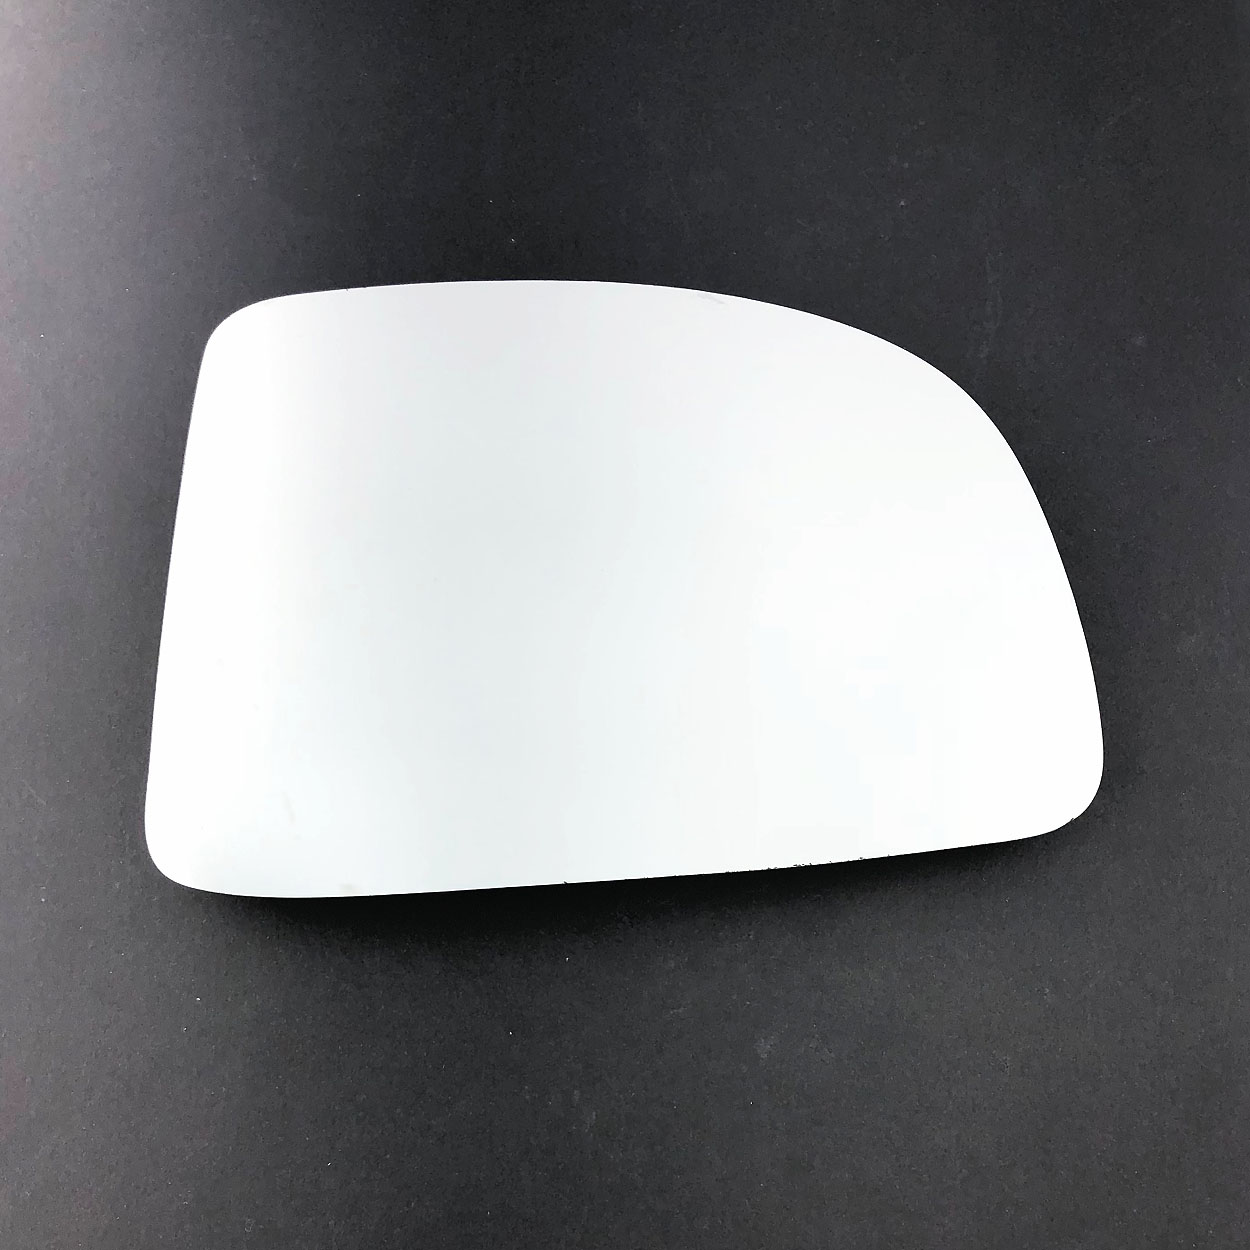 KIA Carens Wing Mirror Glass RIGHT HAND ( UK Driver Side ) 2006 to 2012 – Convex Wing Mirror